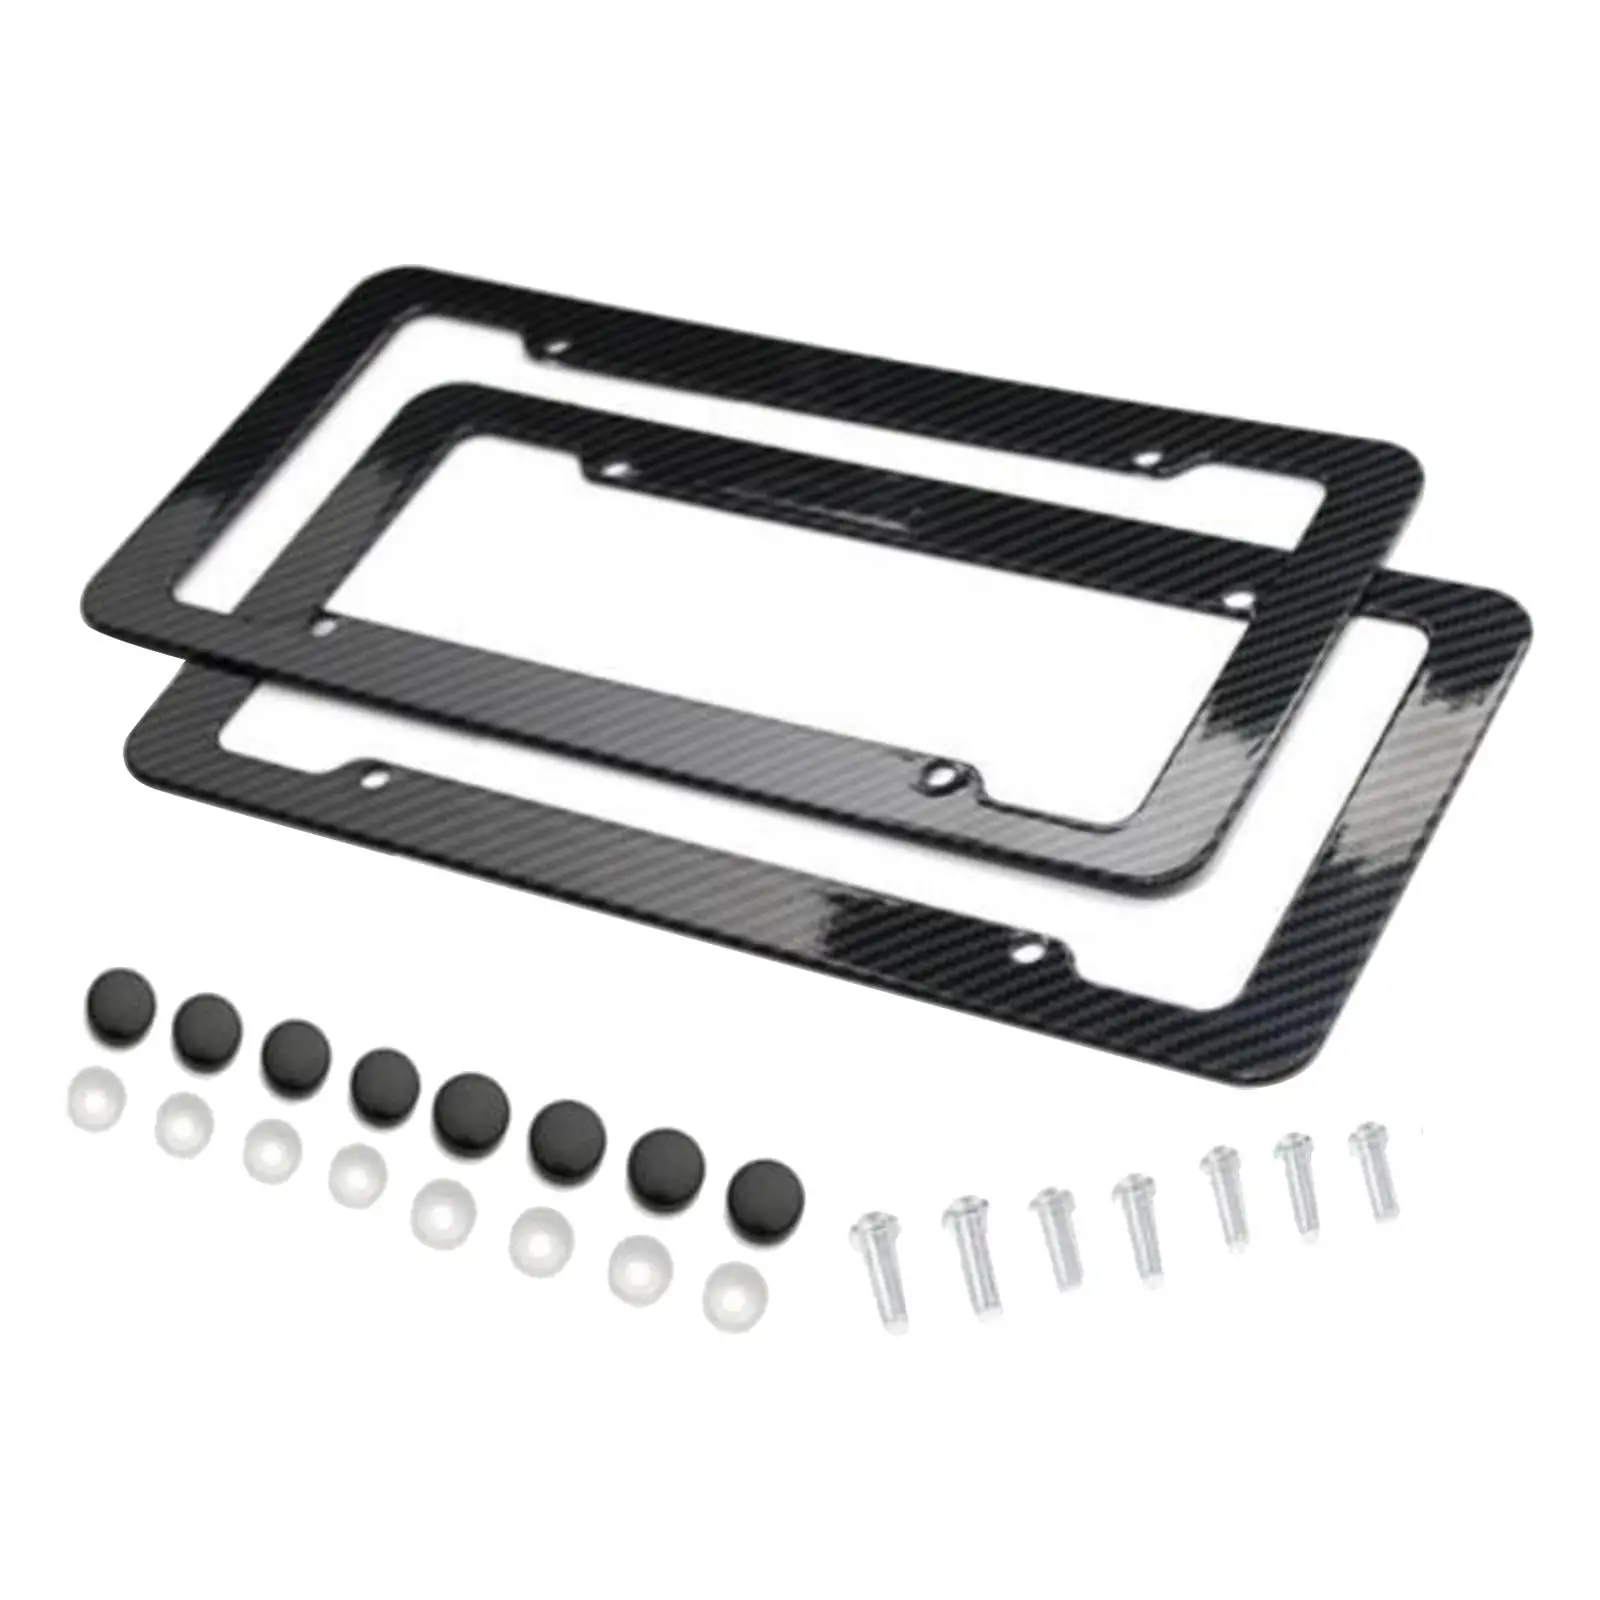 2Pcs Carbon Fiber Style  Frames Front and Rear with Screws Holder Plate Covers for Truck us Install